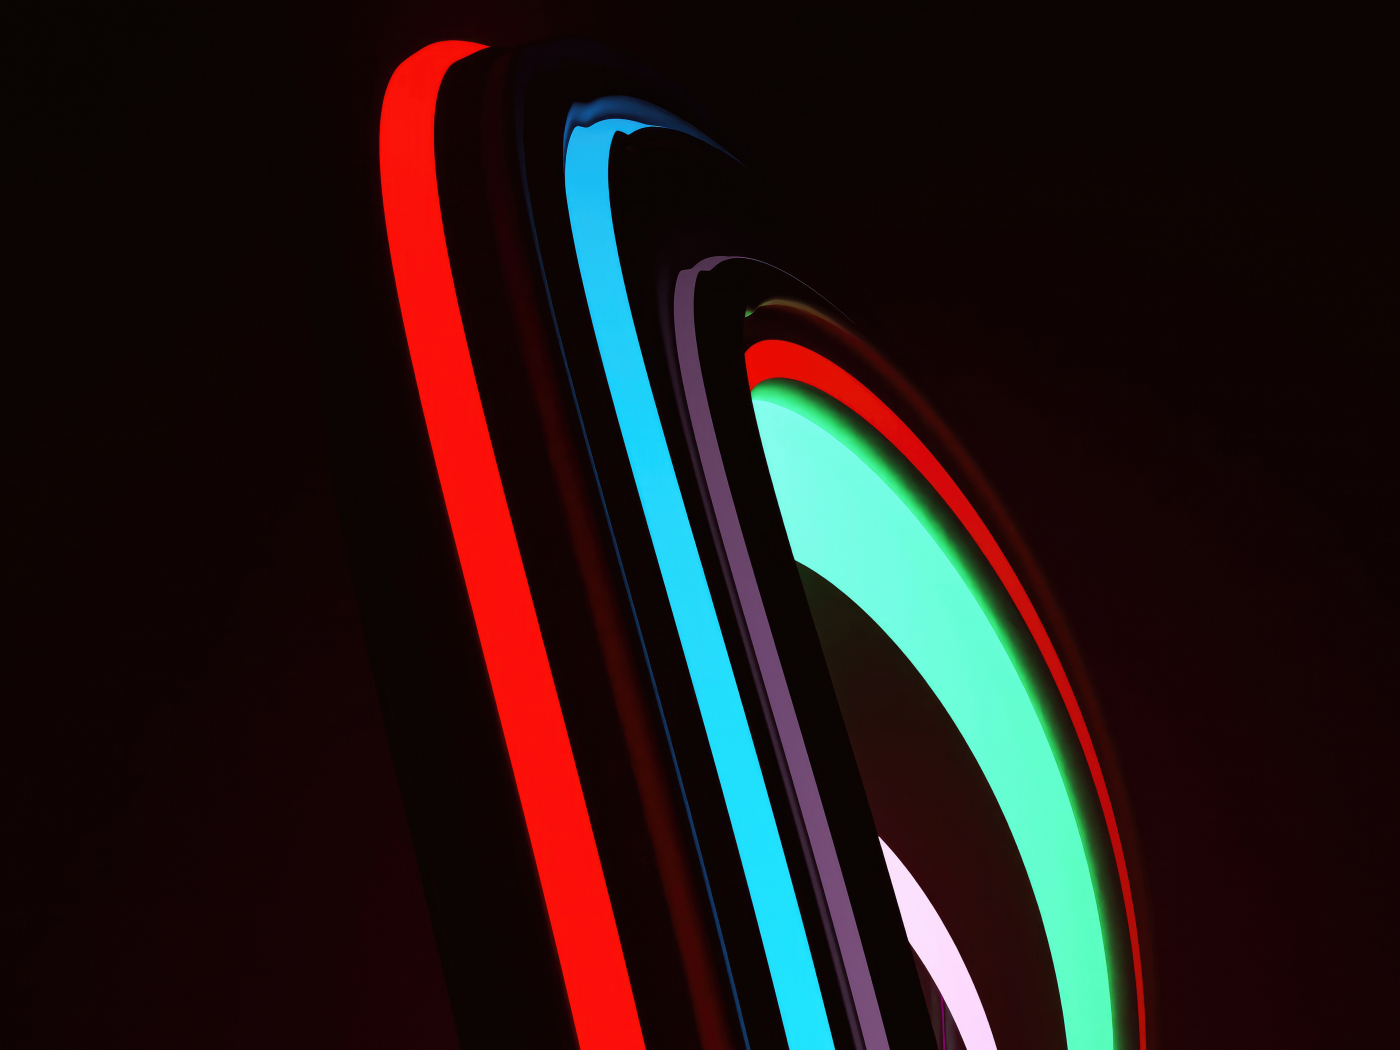 Download wallpaper 1400x1050 neon shape, stirpes and lines curvy and ...